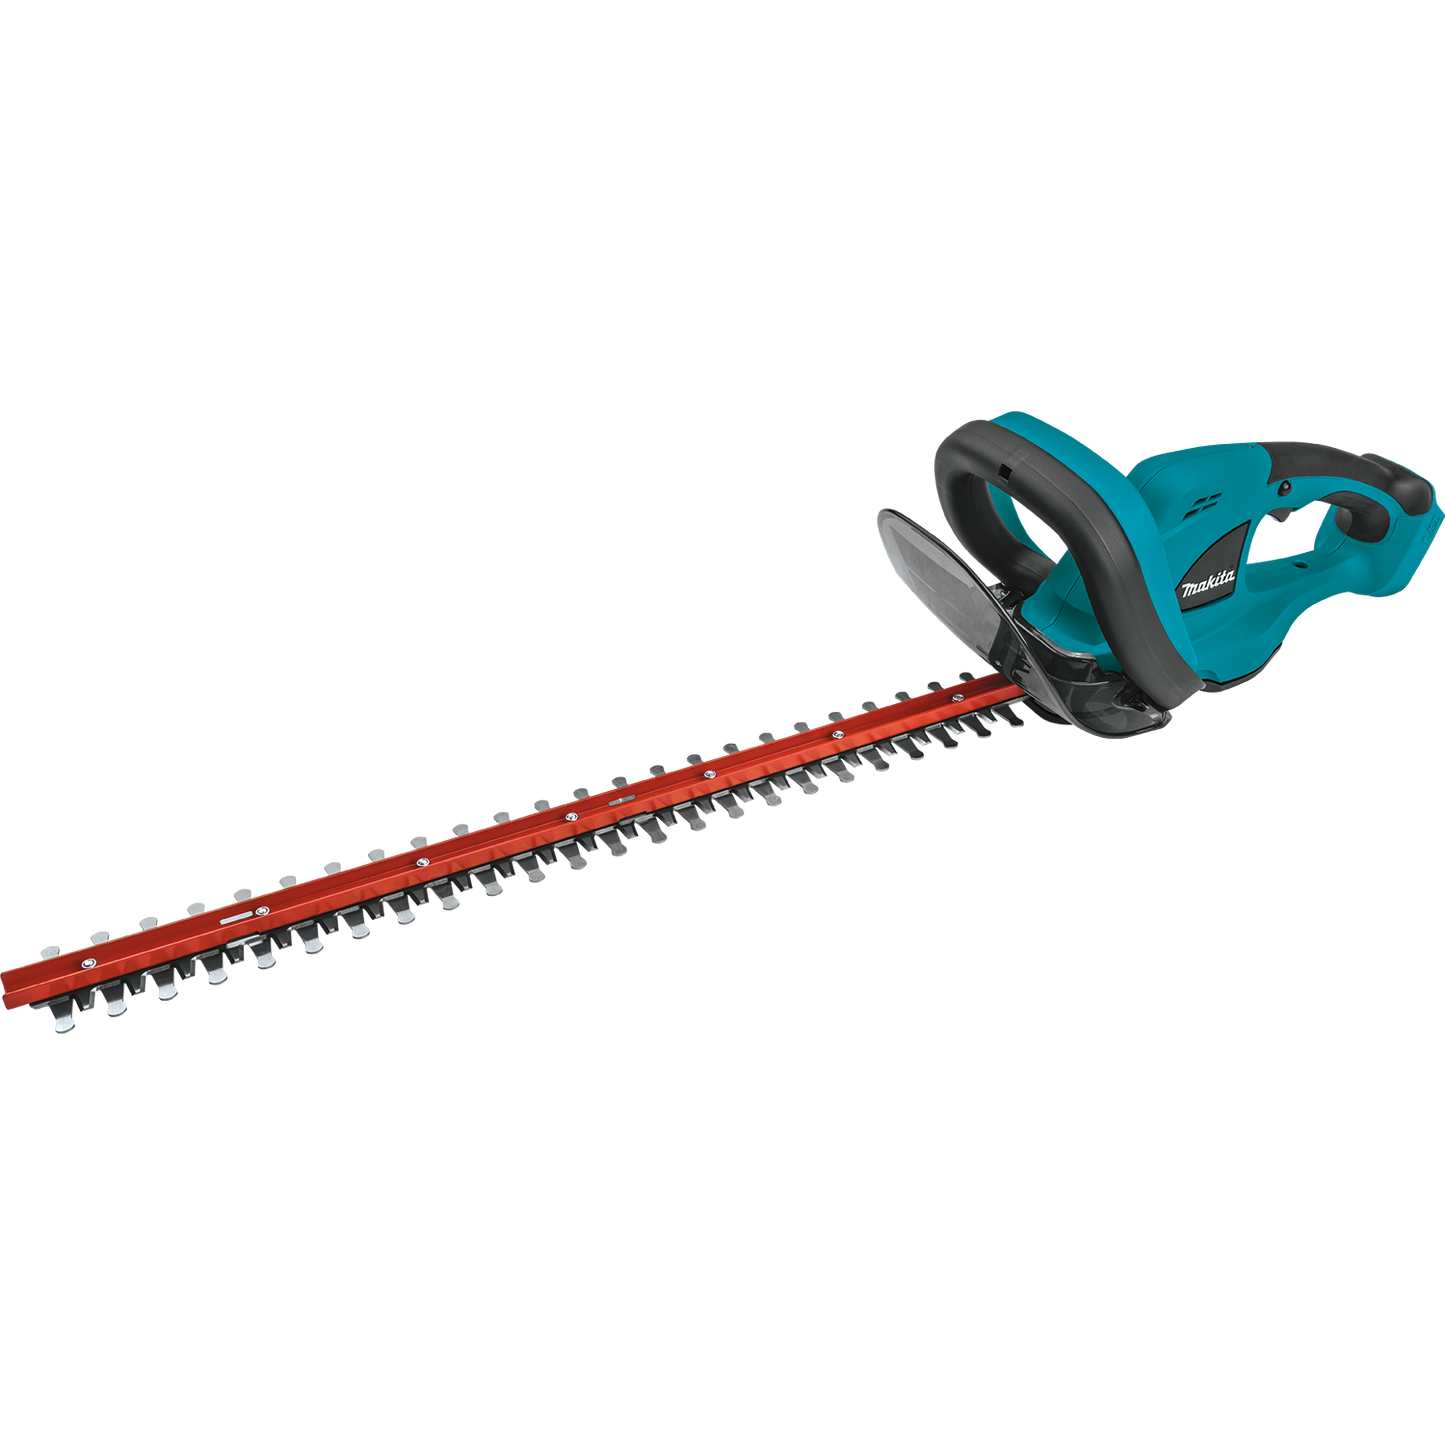 XHU02Z 18V LXT 22'' HEDGE TRIMMER (TOOL ONLY)